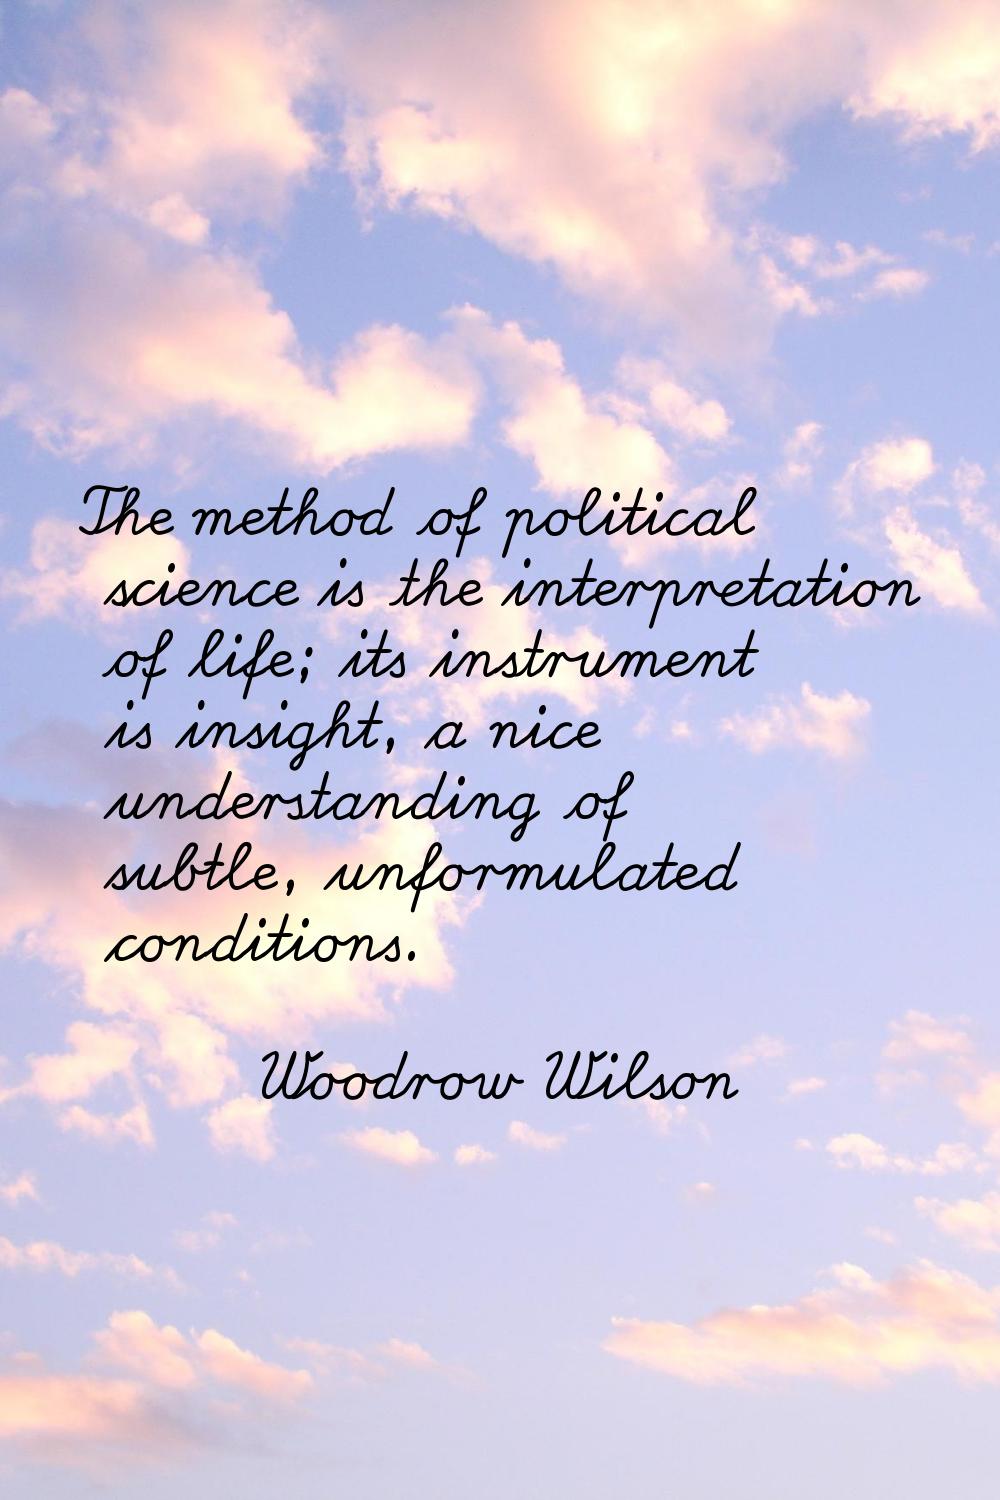 The method of political science is the interpretation of life; its instrument is insight, a nice un